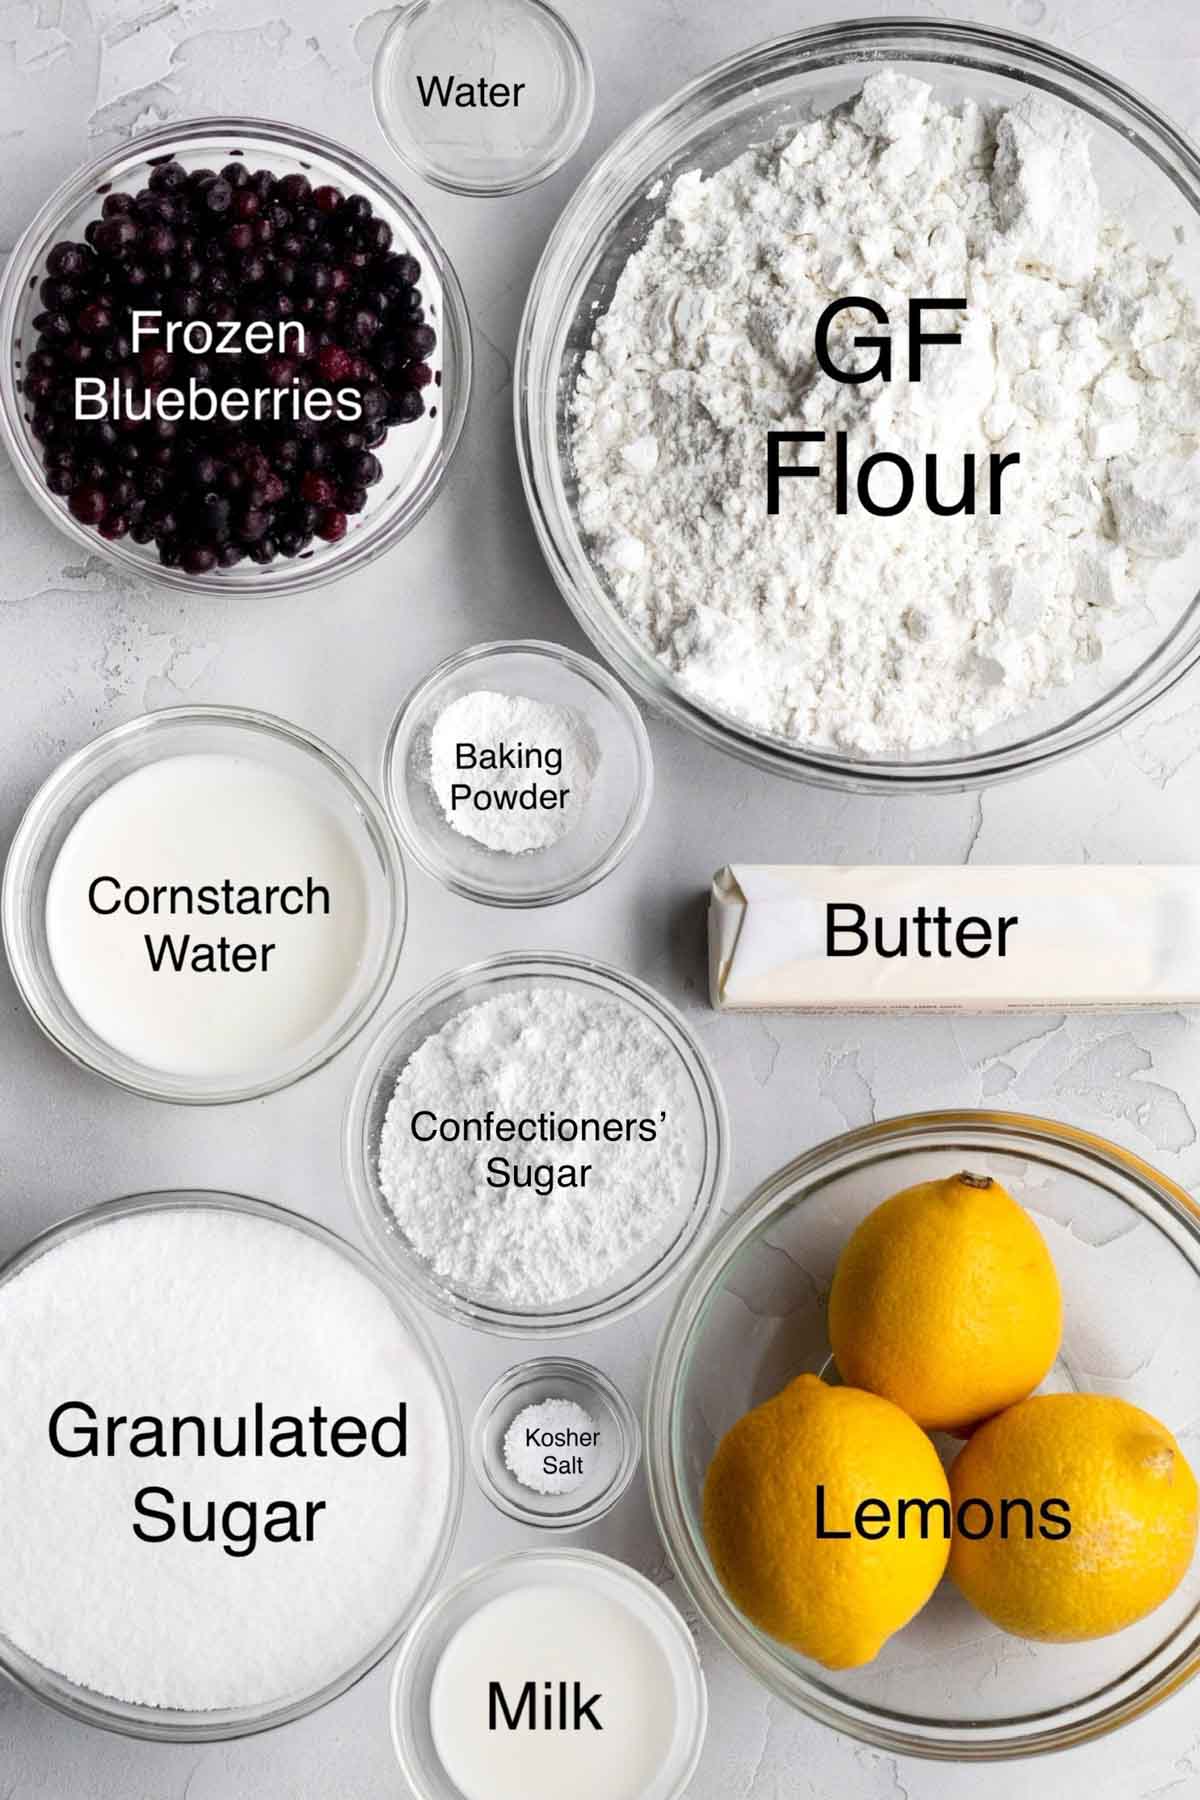 Frozen blueberries, water, gluten free flour, cornstarch water, baking powder, butter, confectioners' sugar, granulated sugar, kosher salt, three whole lemons, and milk in separate containers.